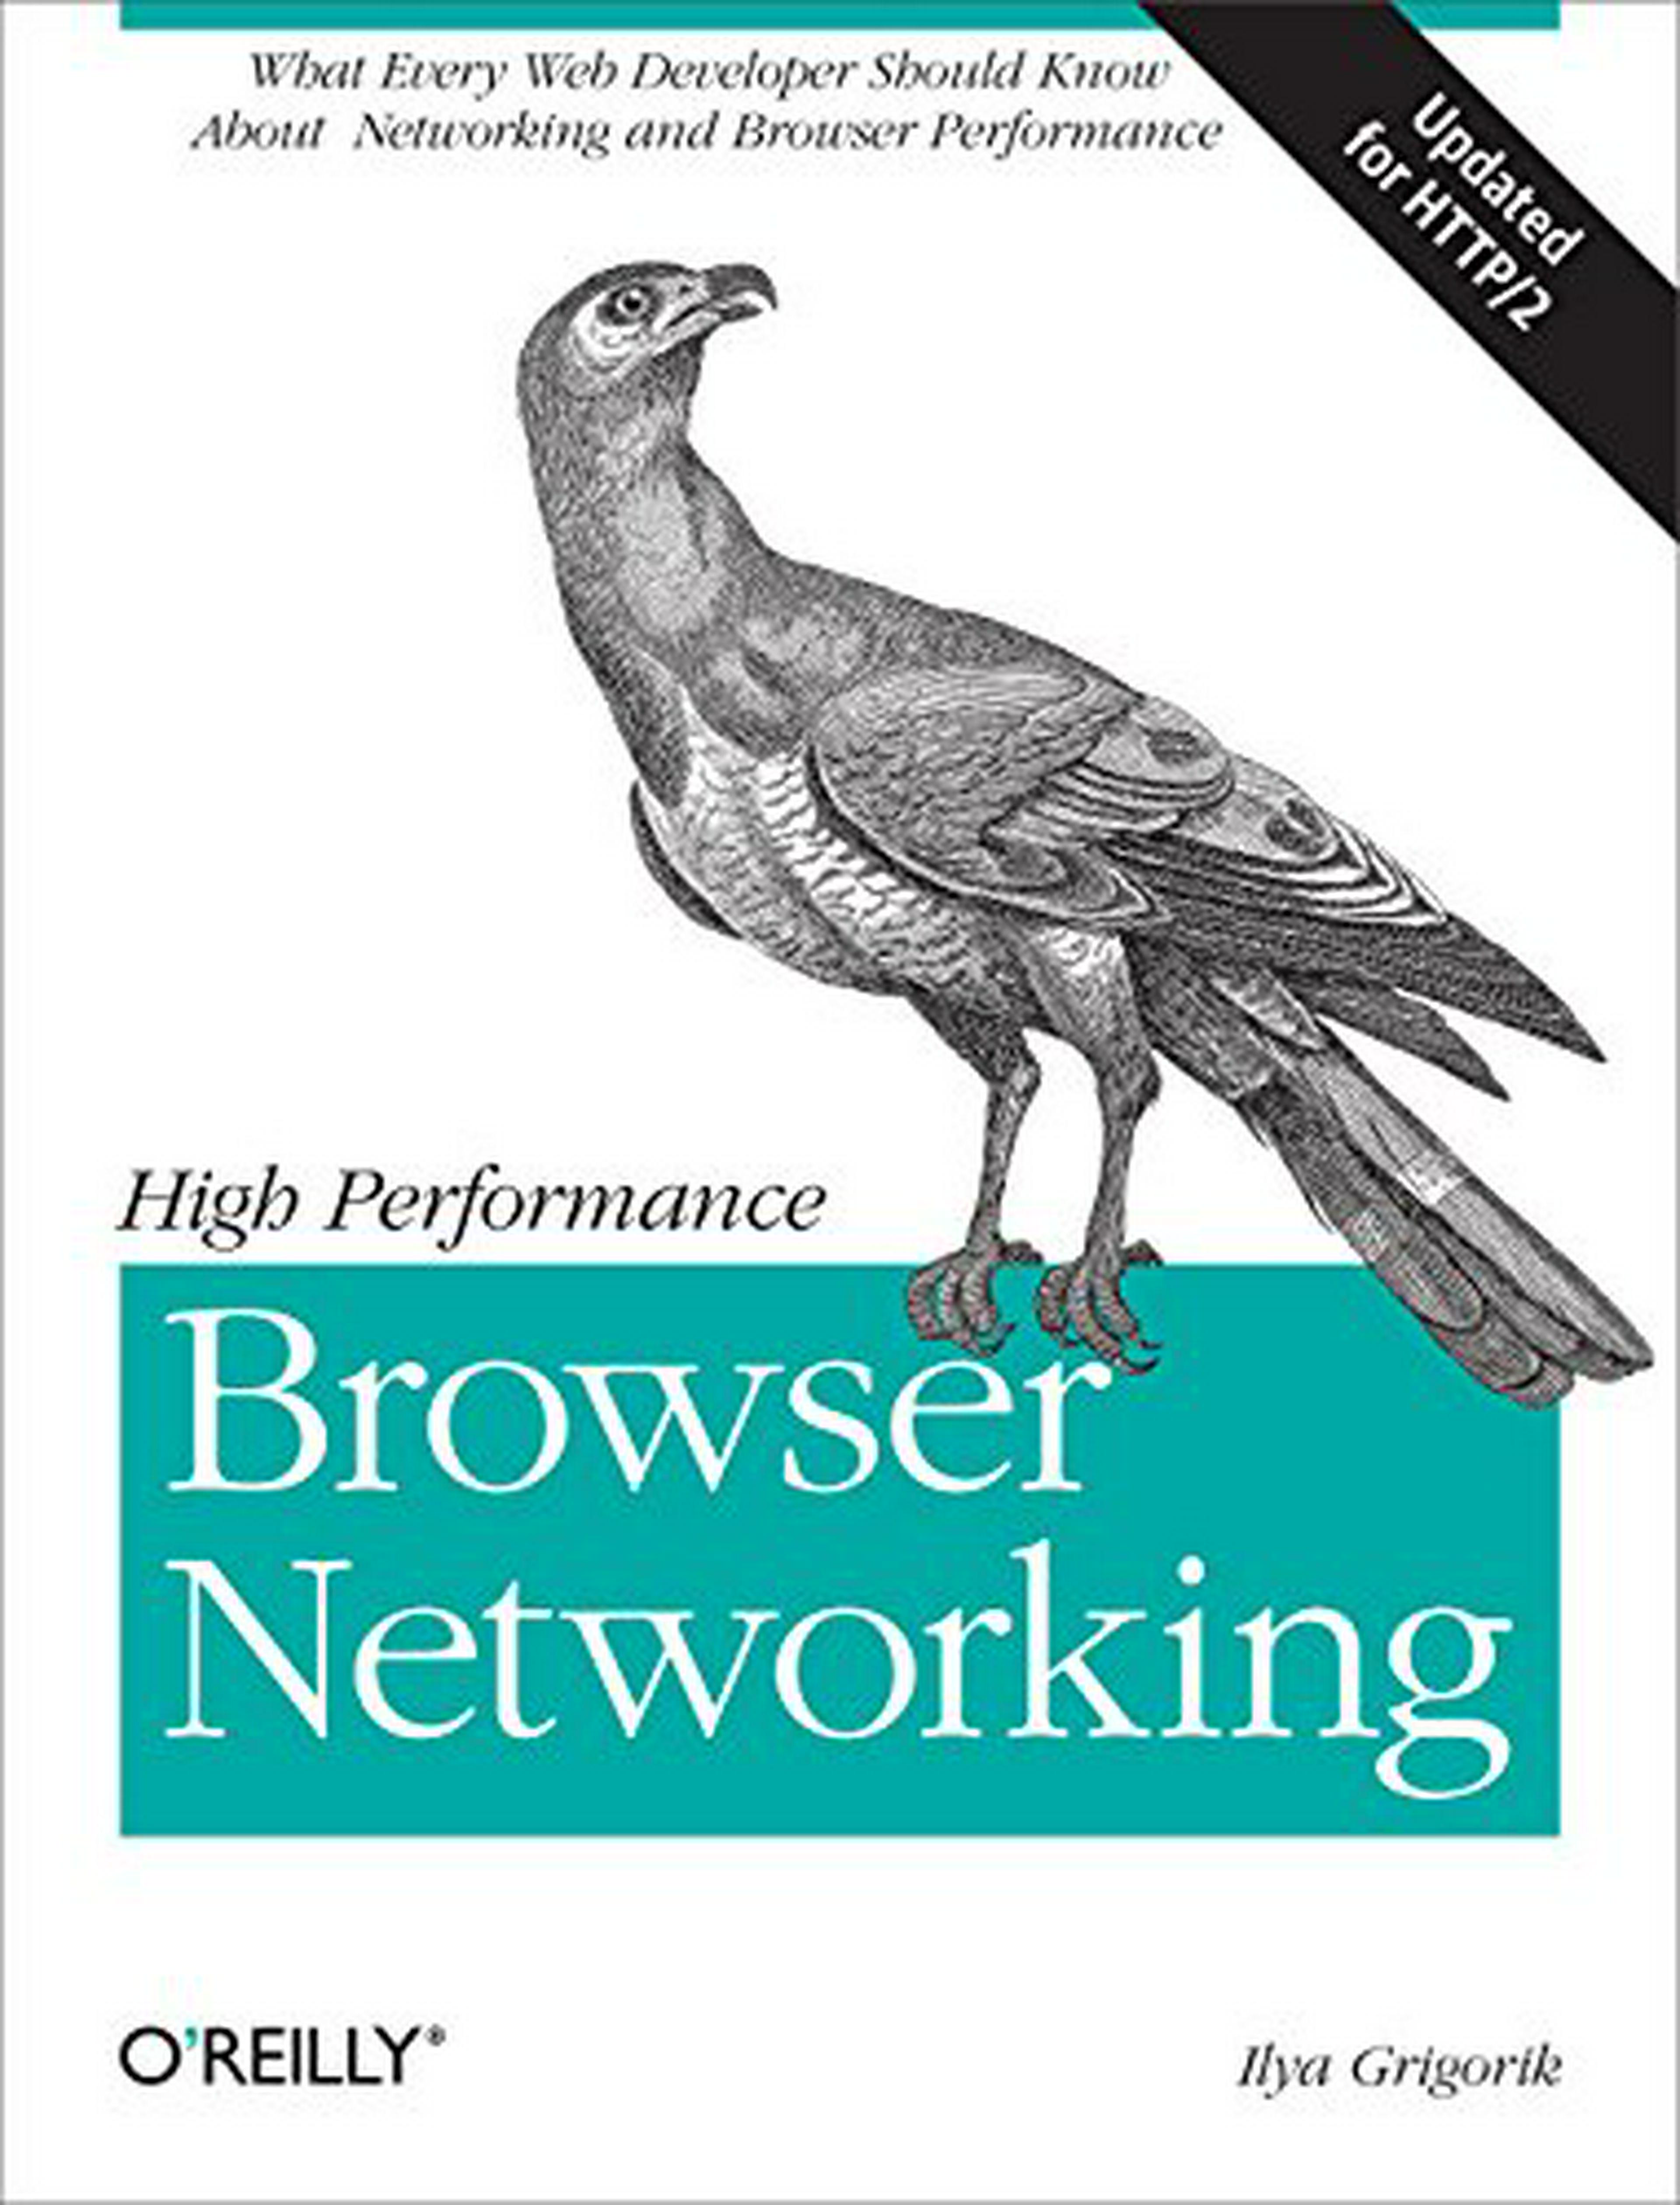 Cover Image for Book notes. Browser Networking by Ilya Grigorik